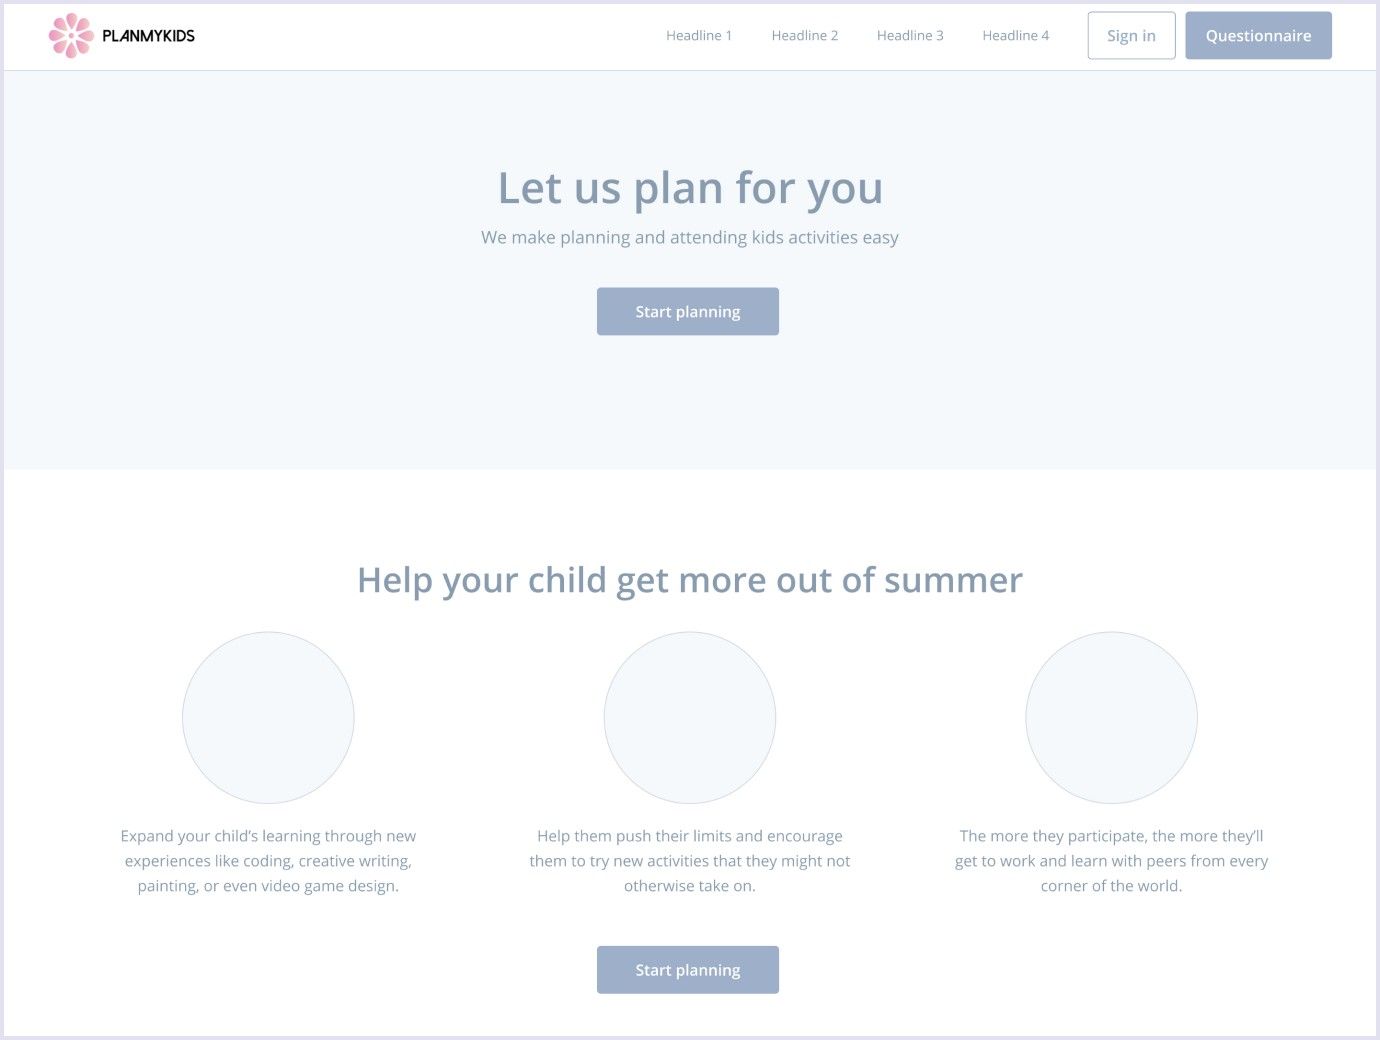 Prototype created by Codca team for the activity booking marketplace PlanMyKids